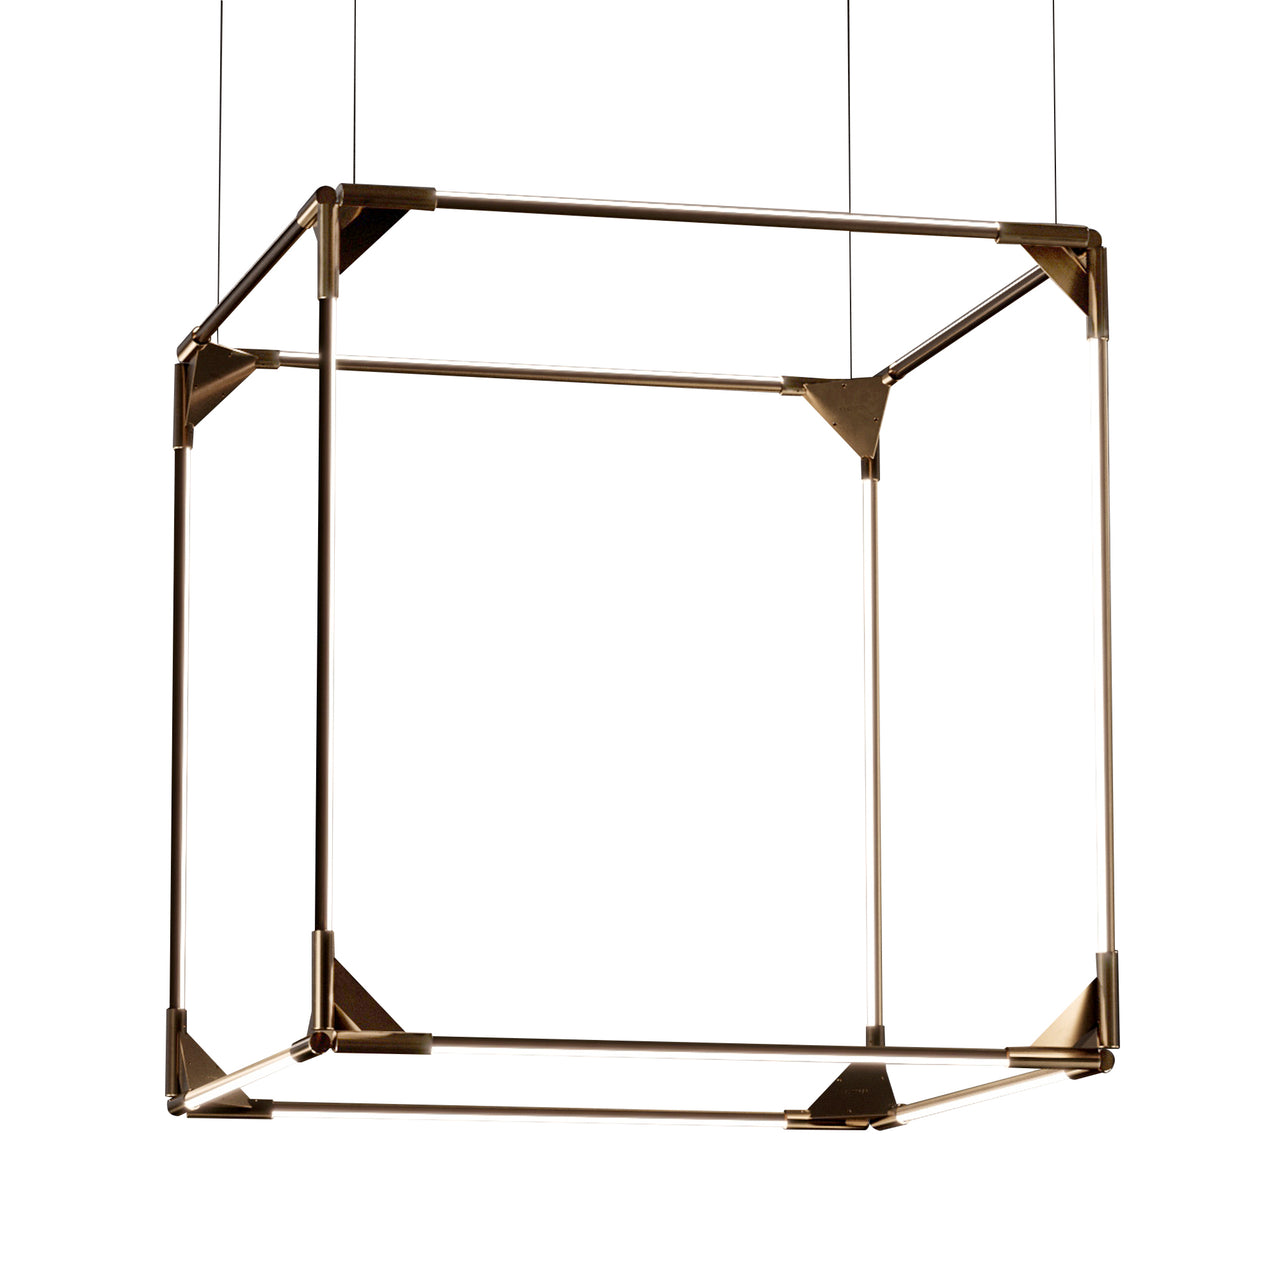 Thin Solids Cube Light: Large - 24